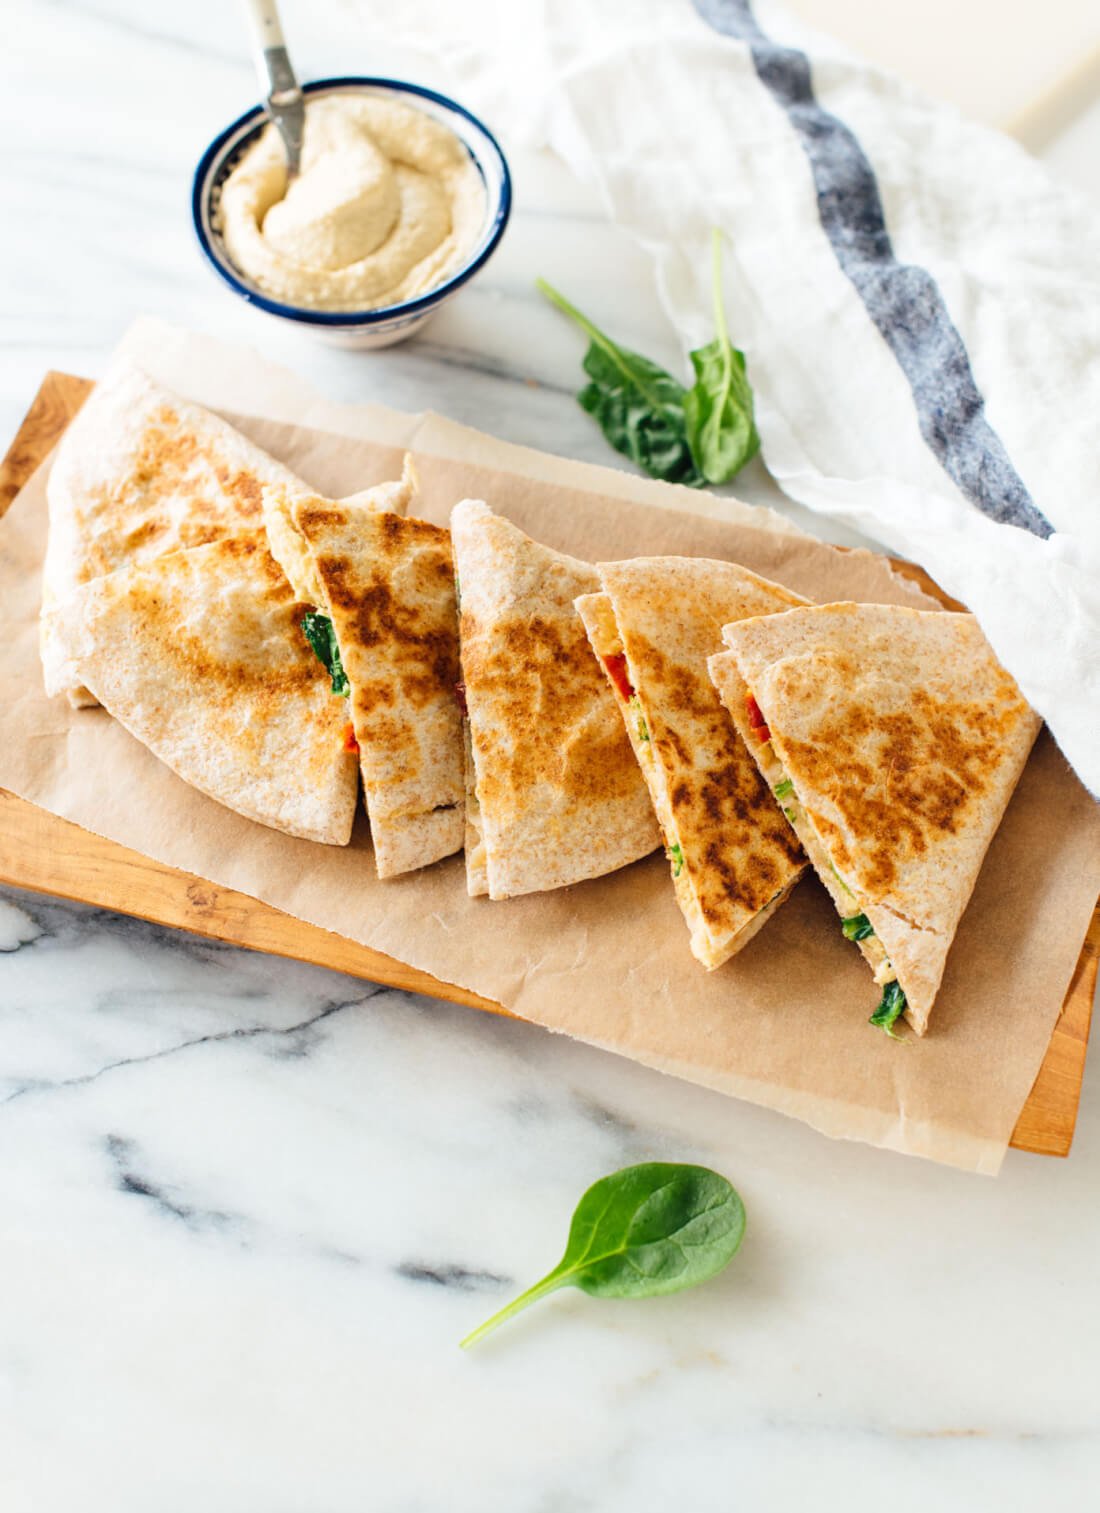 This hummus quesadilla recipe is simple, quick and healthy, too! Dairy-free and vegan (also gluten-free if you use gluten-free tortillas). Get the recipe at cookieandkate.com